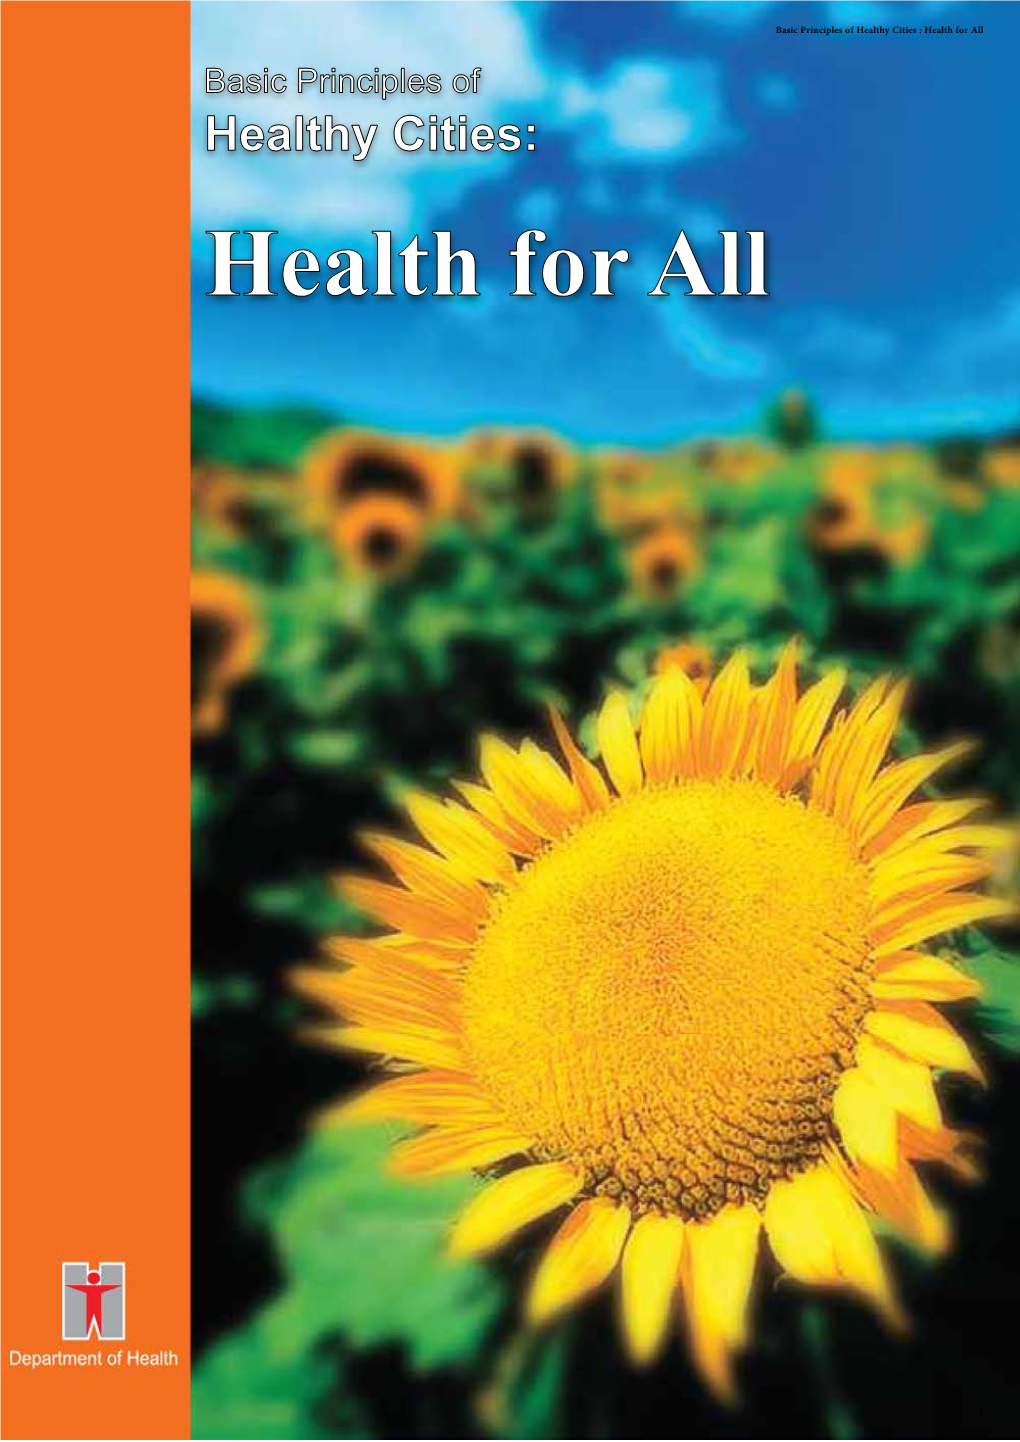 Basic Principles of Healthy Cities: Health for All